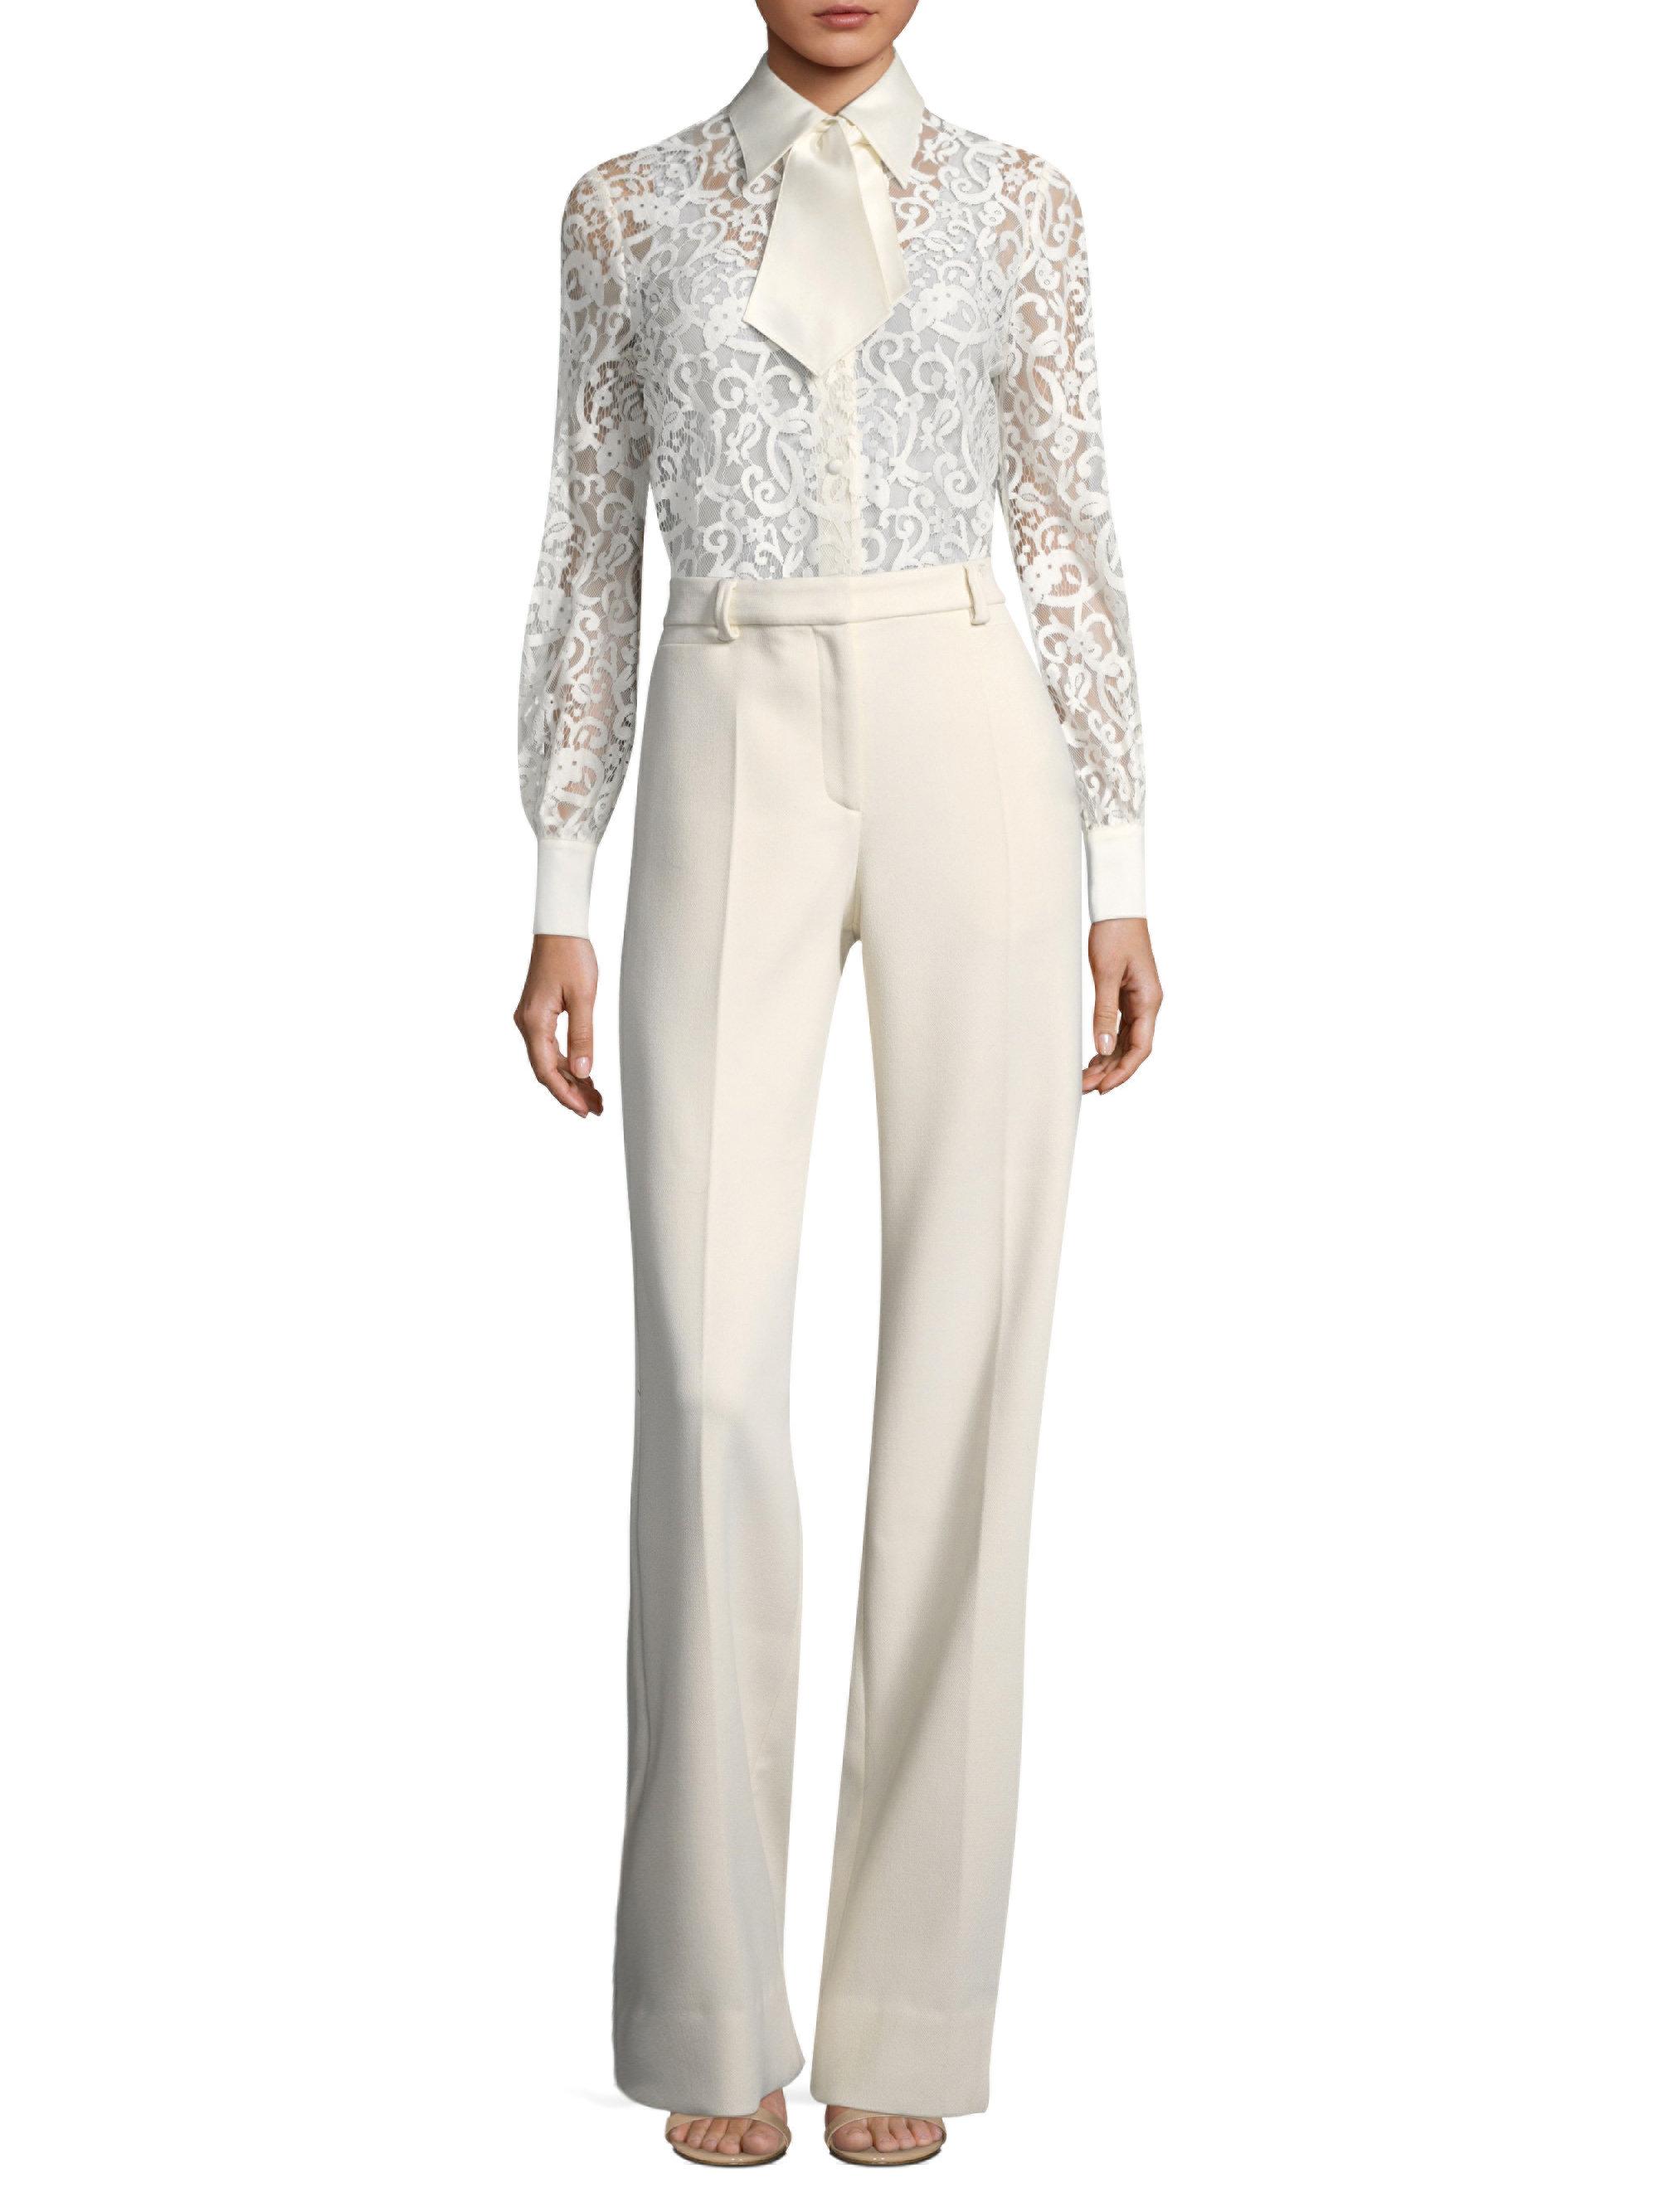 Tory Burch Synthetic Thomas Trousers in Cream (Natural) - Lyst